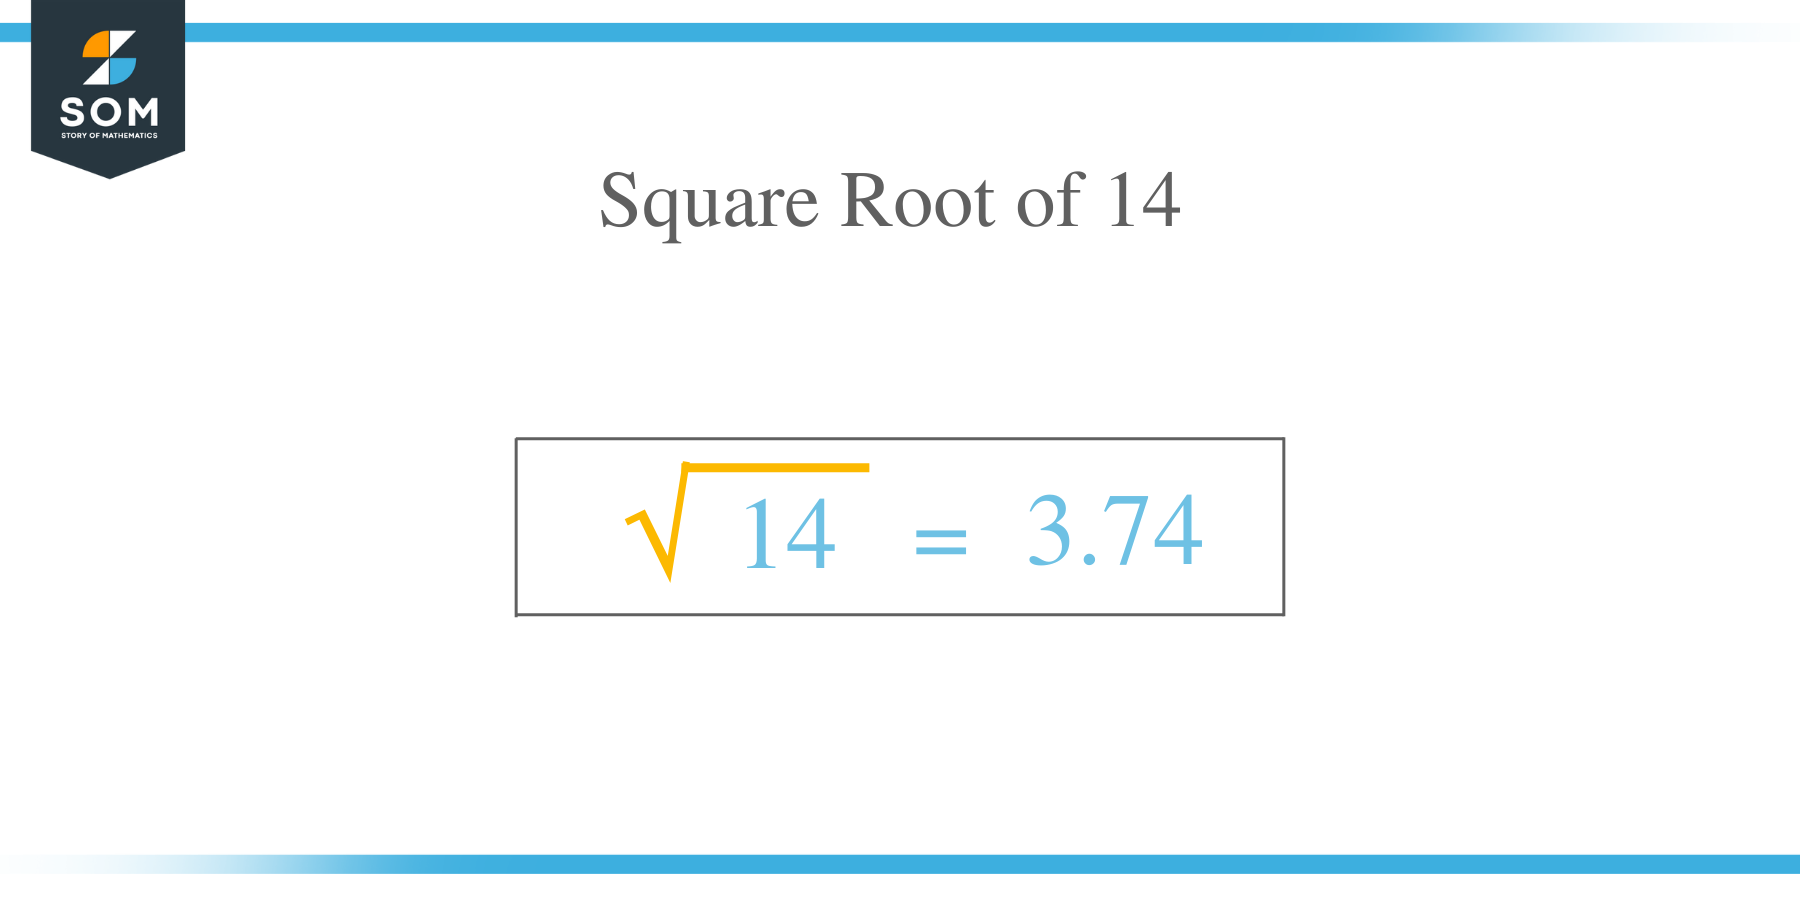 Square Root of 14